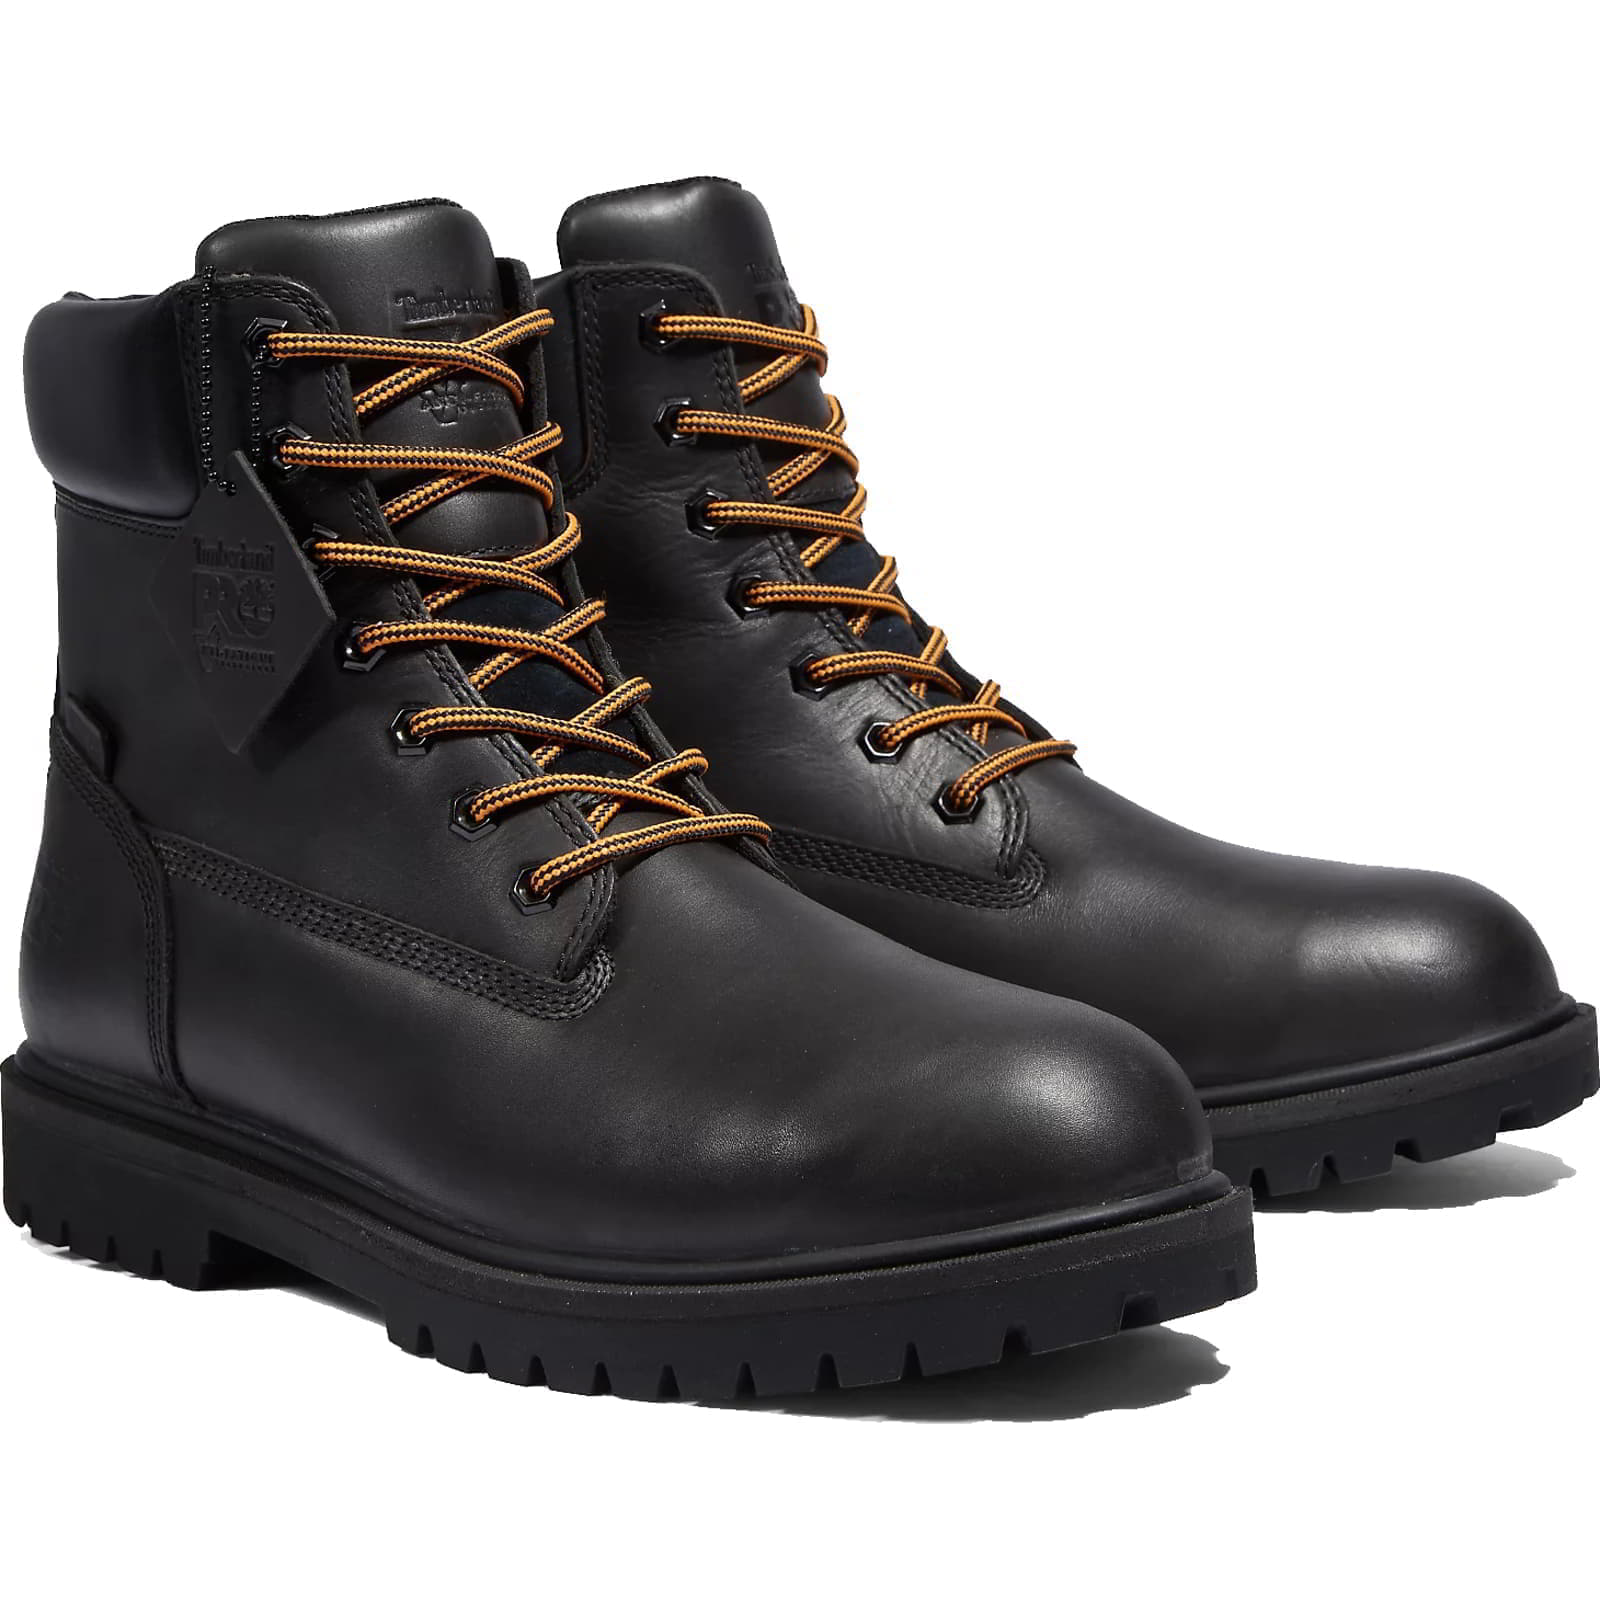 Timberland Pro Mens Iconic Waterproof Safety Toe Cap Work Ankle Boots - UK 7